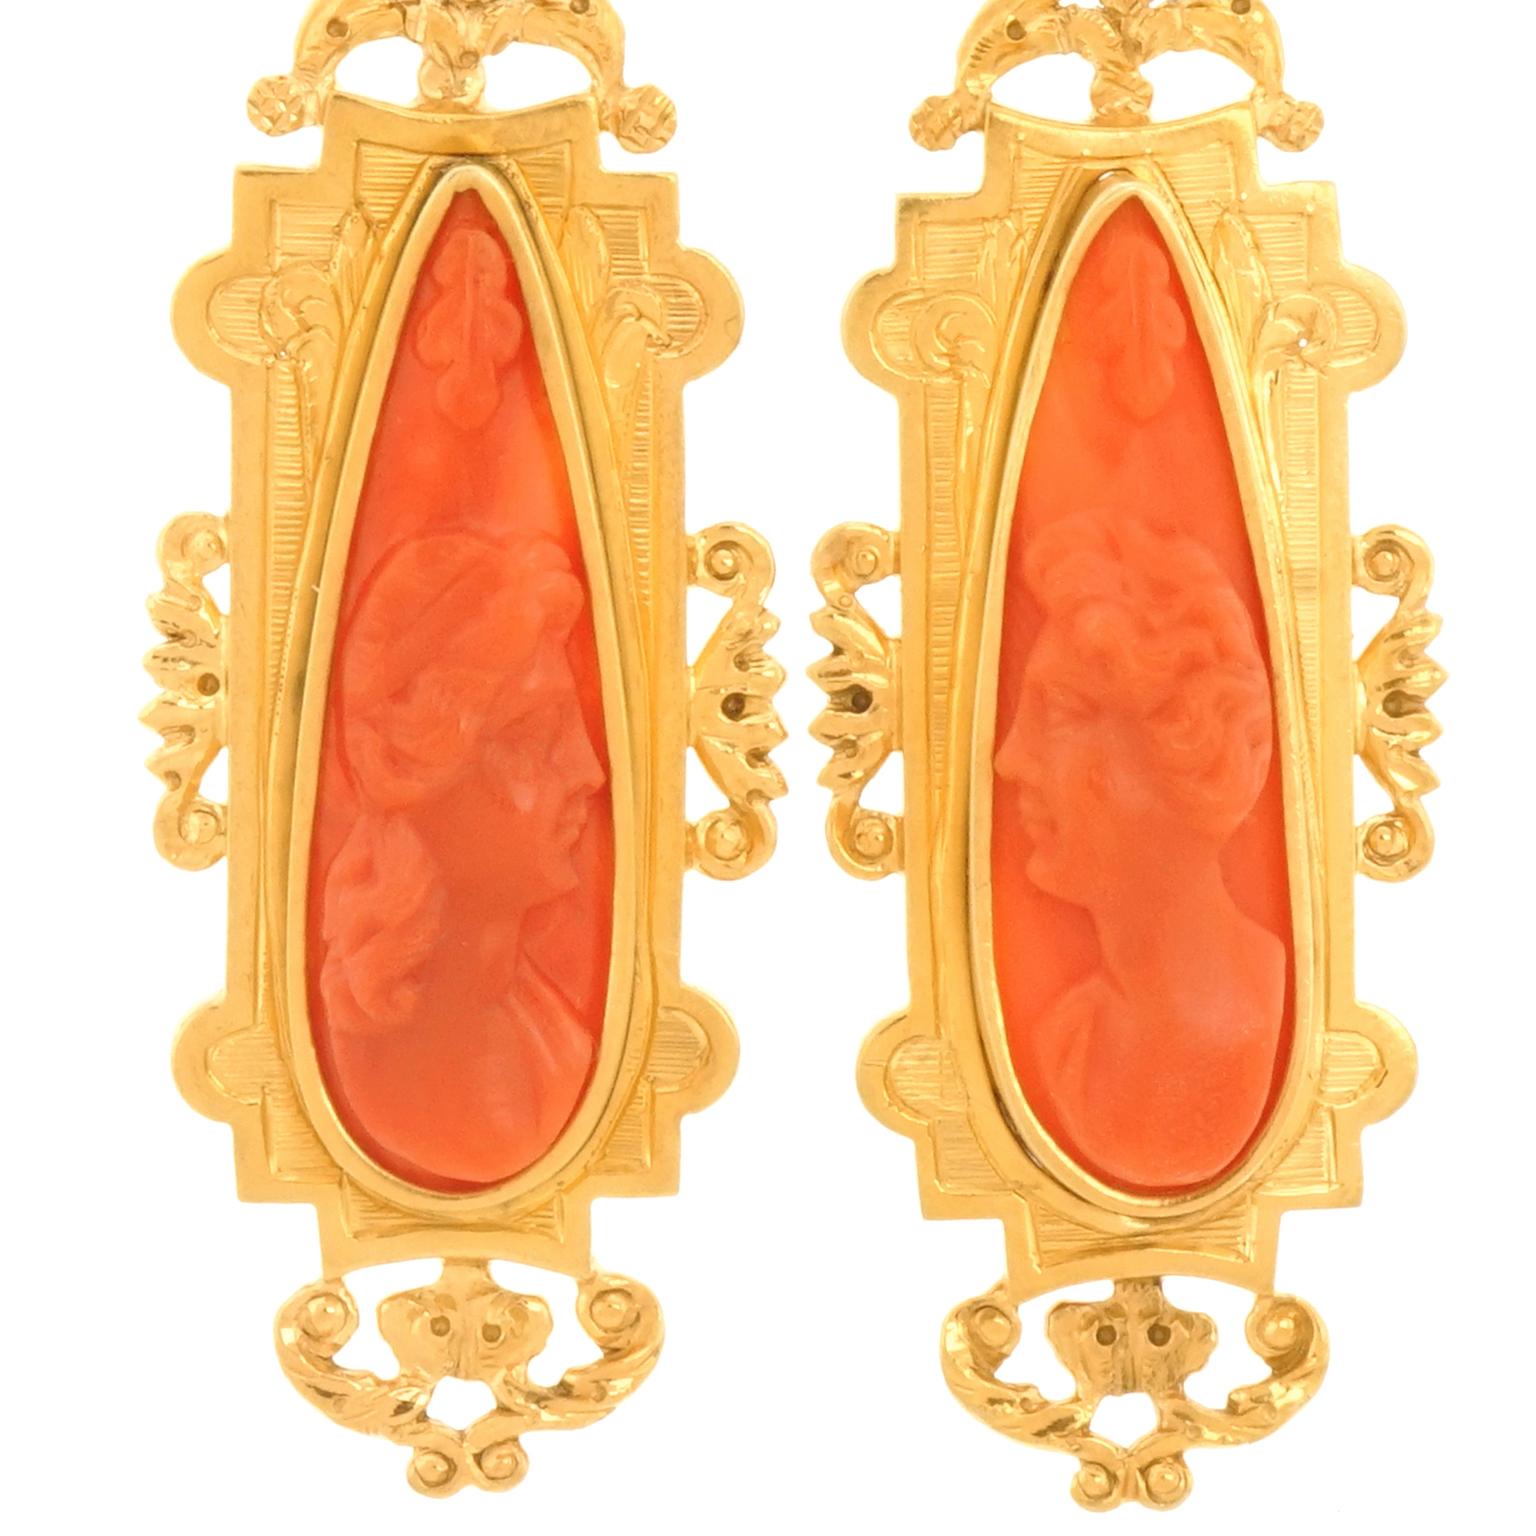 Antique Baroque Revival Coral Cameo Chandelier Earrings In Excellent Condition For Sale In Litchfield, CT